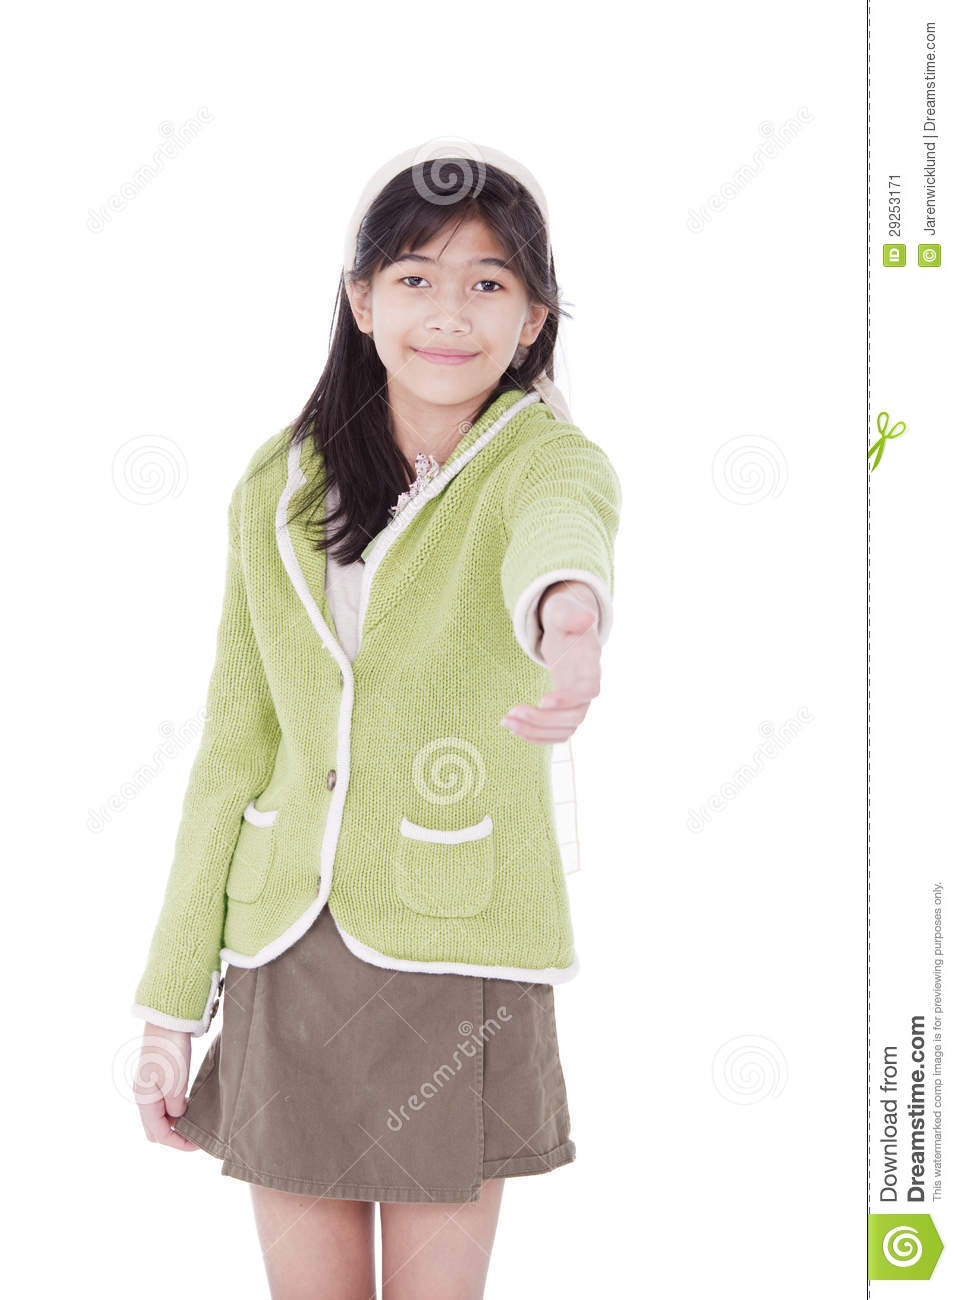 Biracial Asian Girl In Lime Green Sweater Extending Hand In Greeting